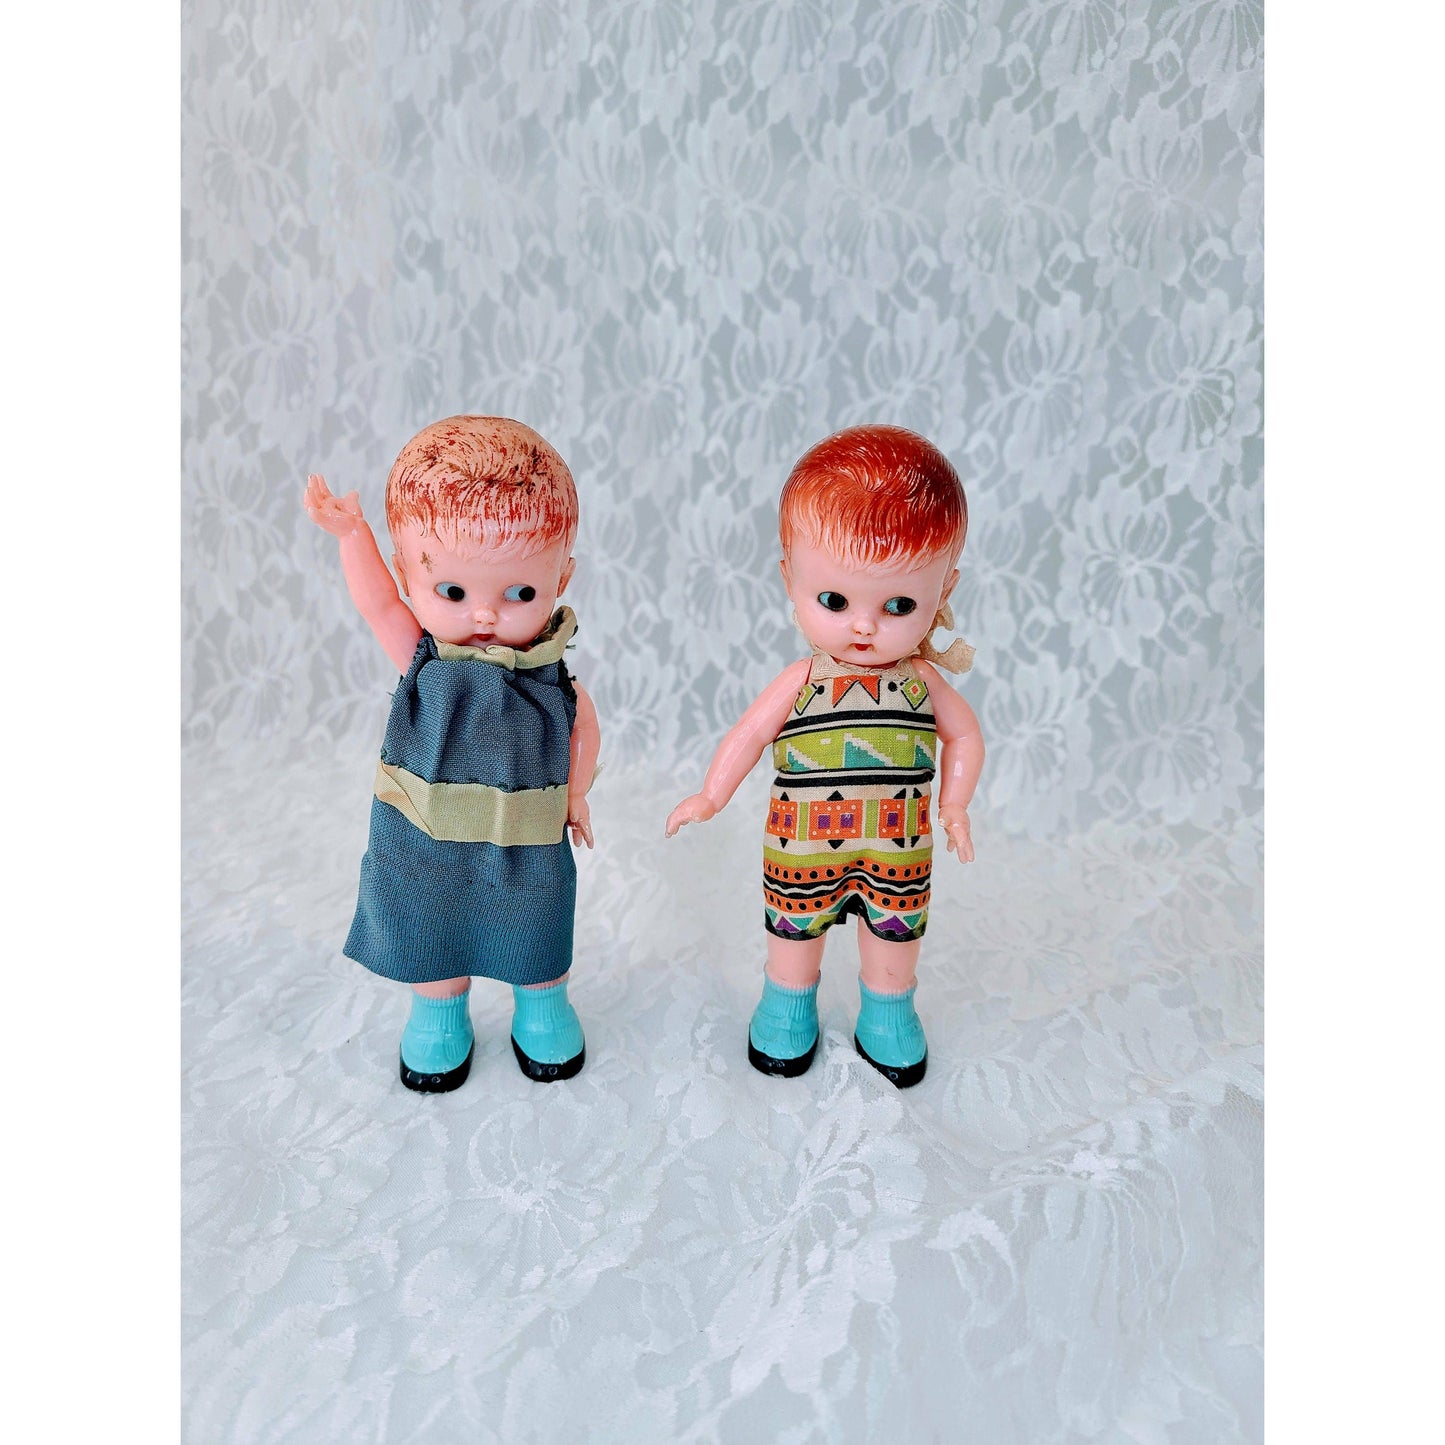 Rare! Set of Two (2) Celluloid 1950s Vintage 6" Kewpie Doll RATTLES ~ Jointed Arms ~ Fixed Legs ~ Moving Arms ~ ORIGINAL Clothing